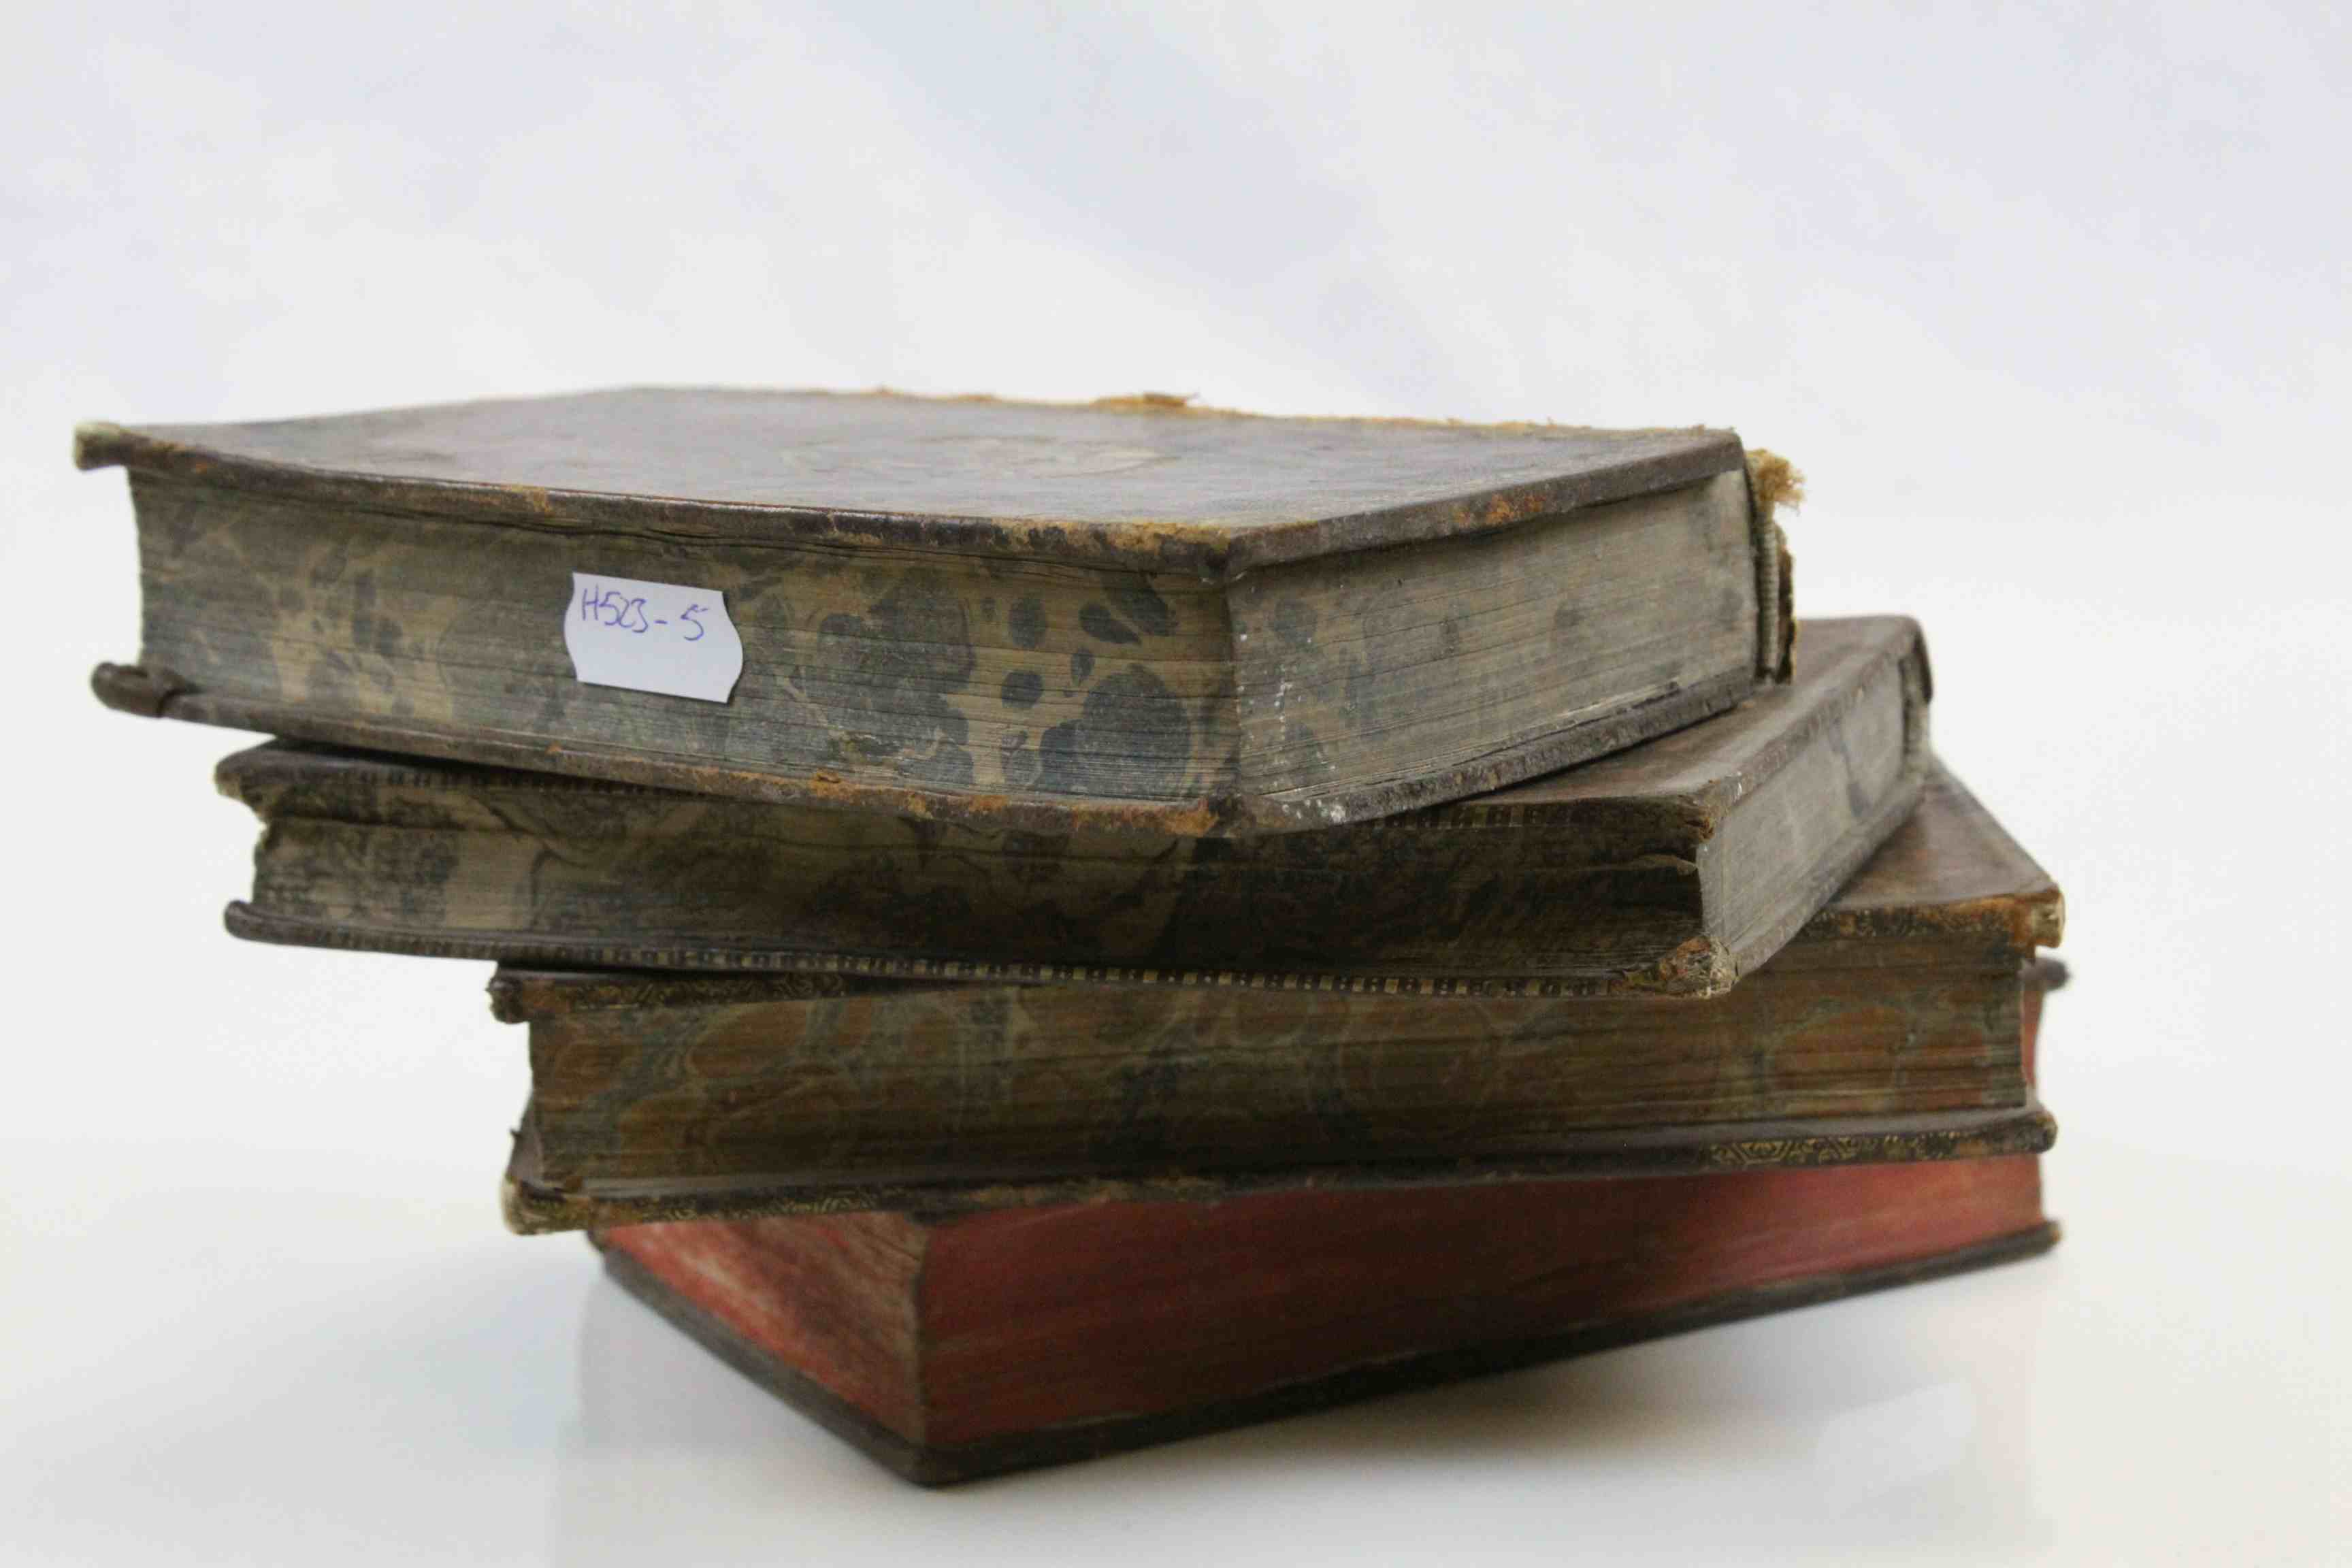 Stack of 3 concealed storage boxes disguised as 4 leather bound books - Image 4 of 6